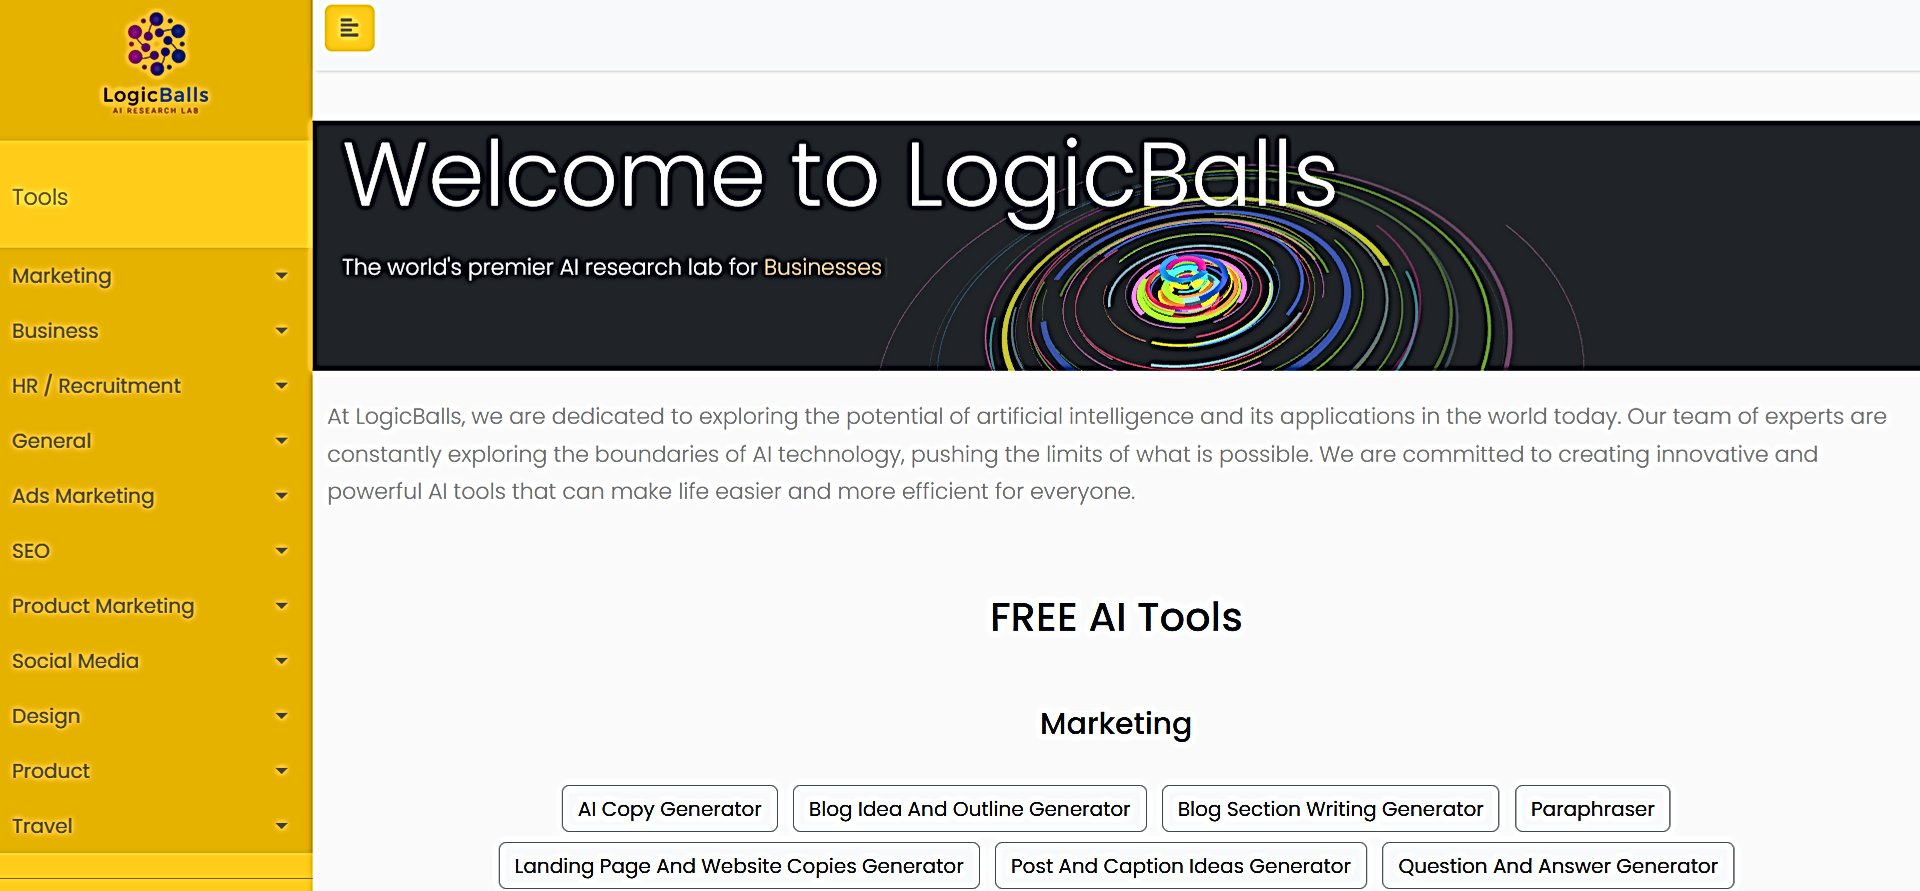 Logicballs featured